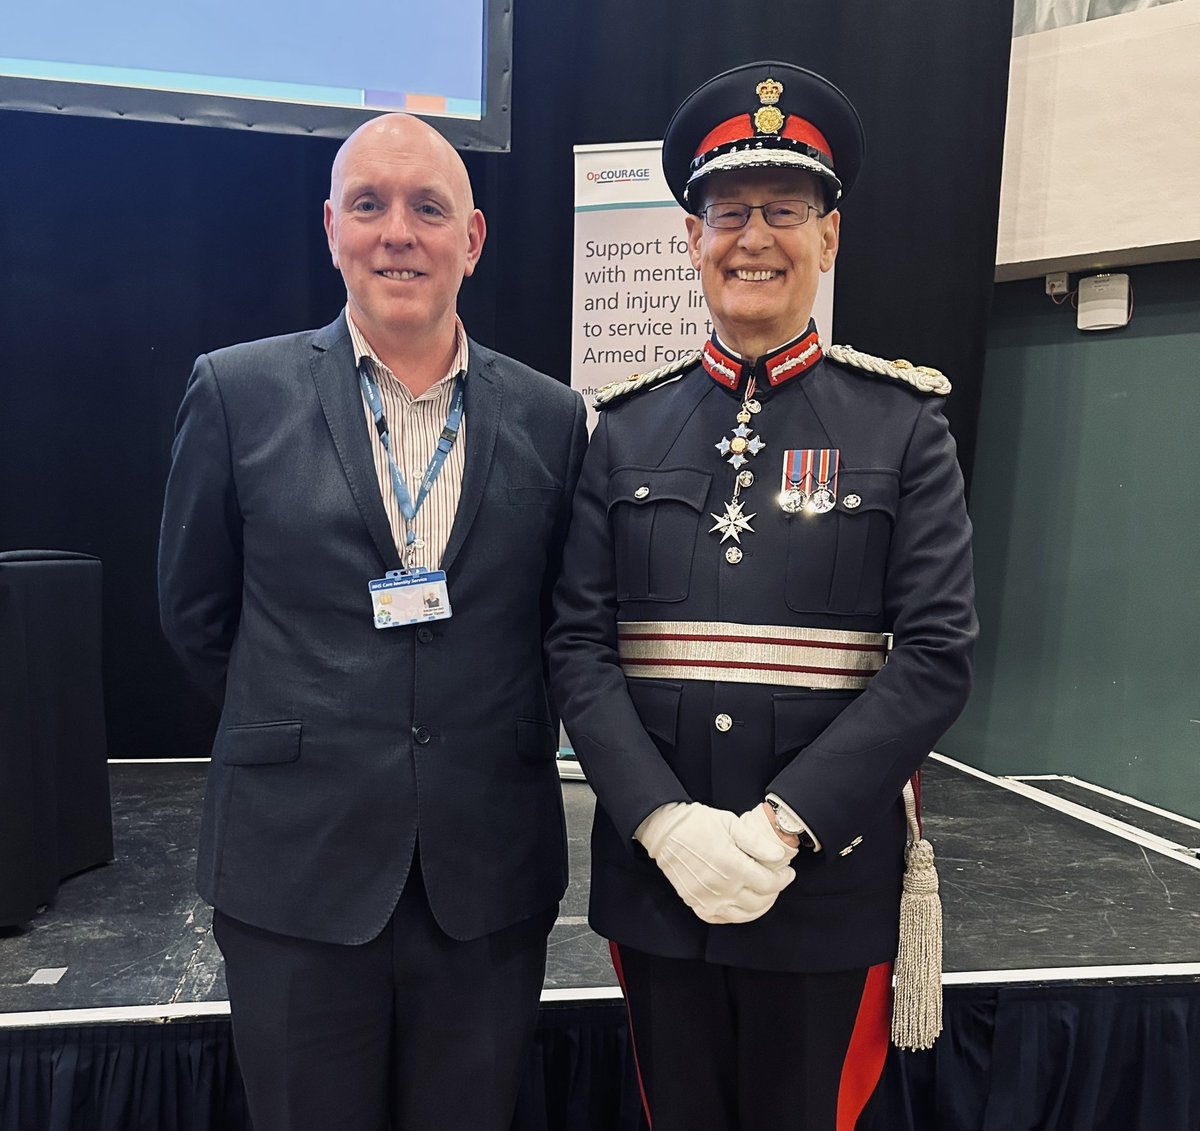 A real privilege to be invited to the #opcourage north of England event today. Finally met our Lord Lieutenant for West Yorkshire Ed Anderson giving his support as always to our #veterans #mentalhealth service. @LeedsandYorkPFT